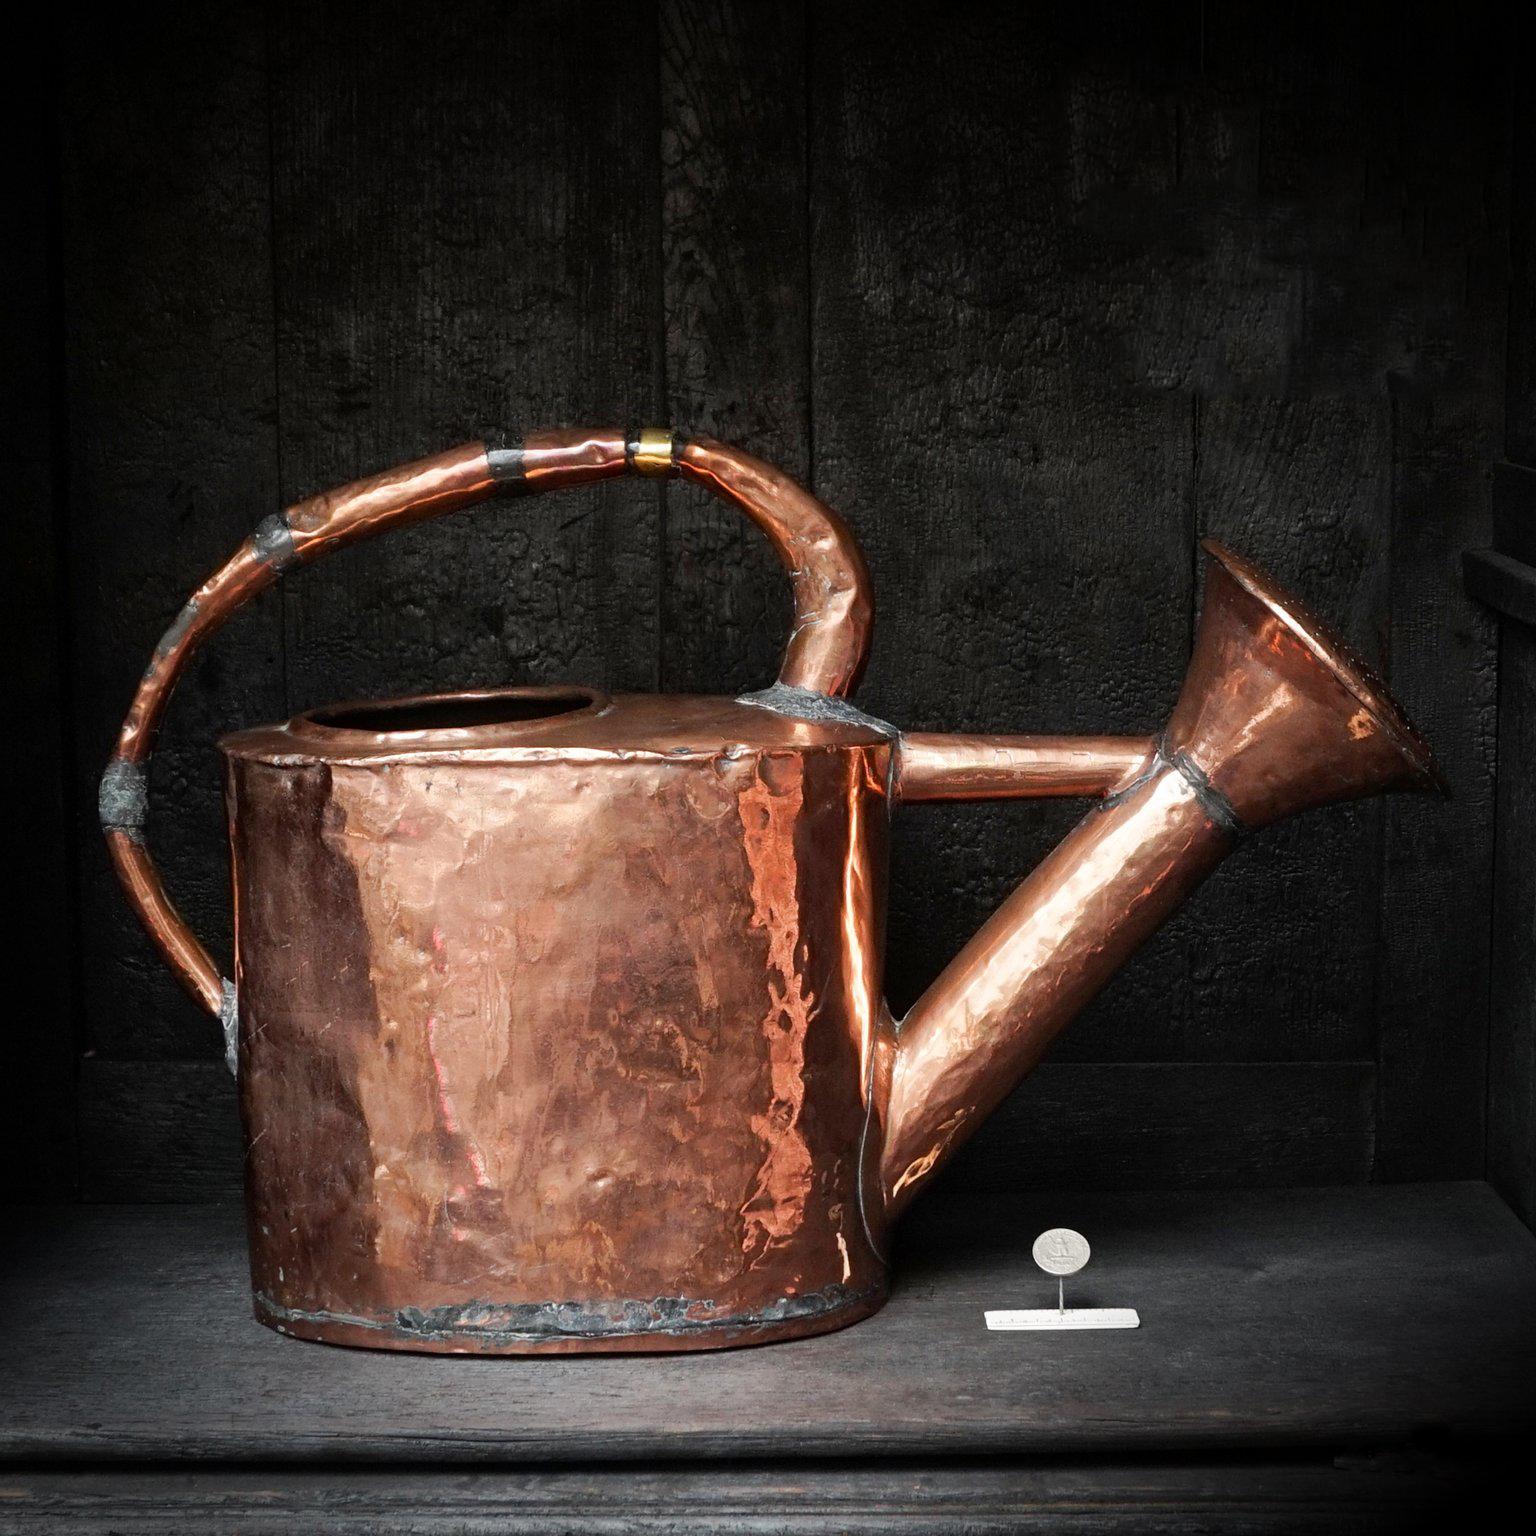 A large and heavy 18th century copper garden watering can.

Hand-beaten or hammered copper can with a non-detachable pouring spout. 
The copper rolled handles show some great 'repairs' which gives this watering can a nice patina.

This would look